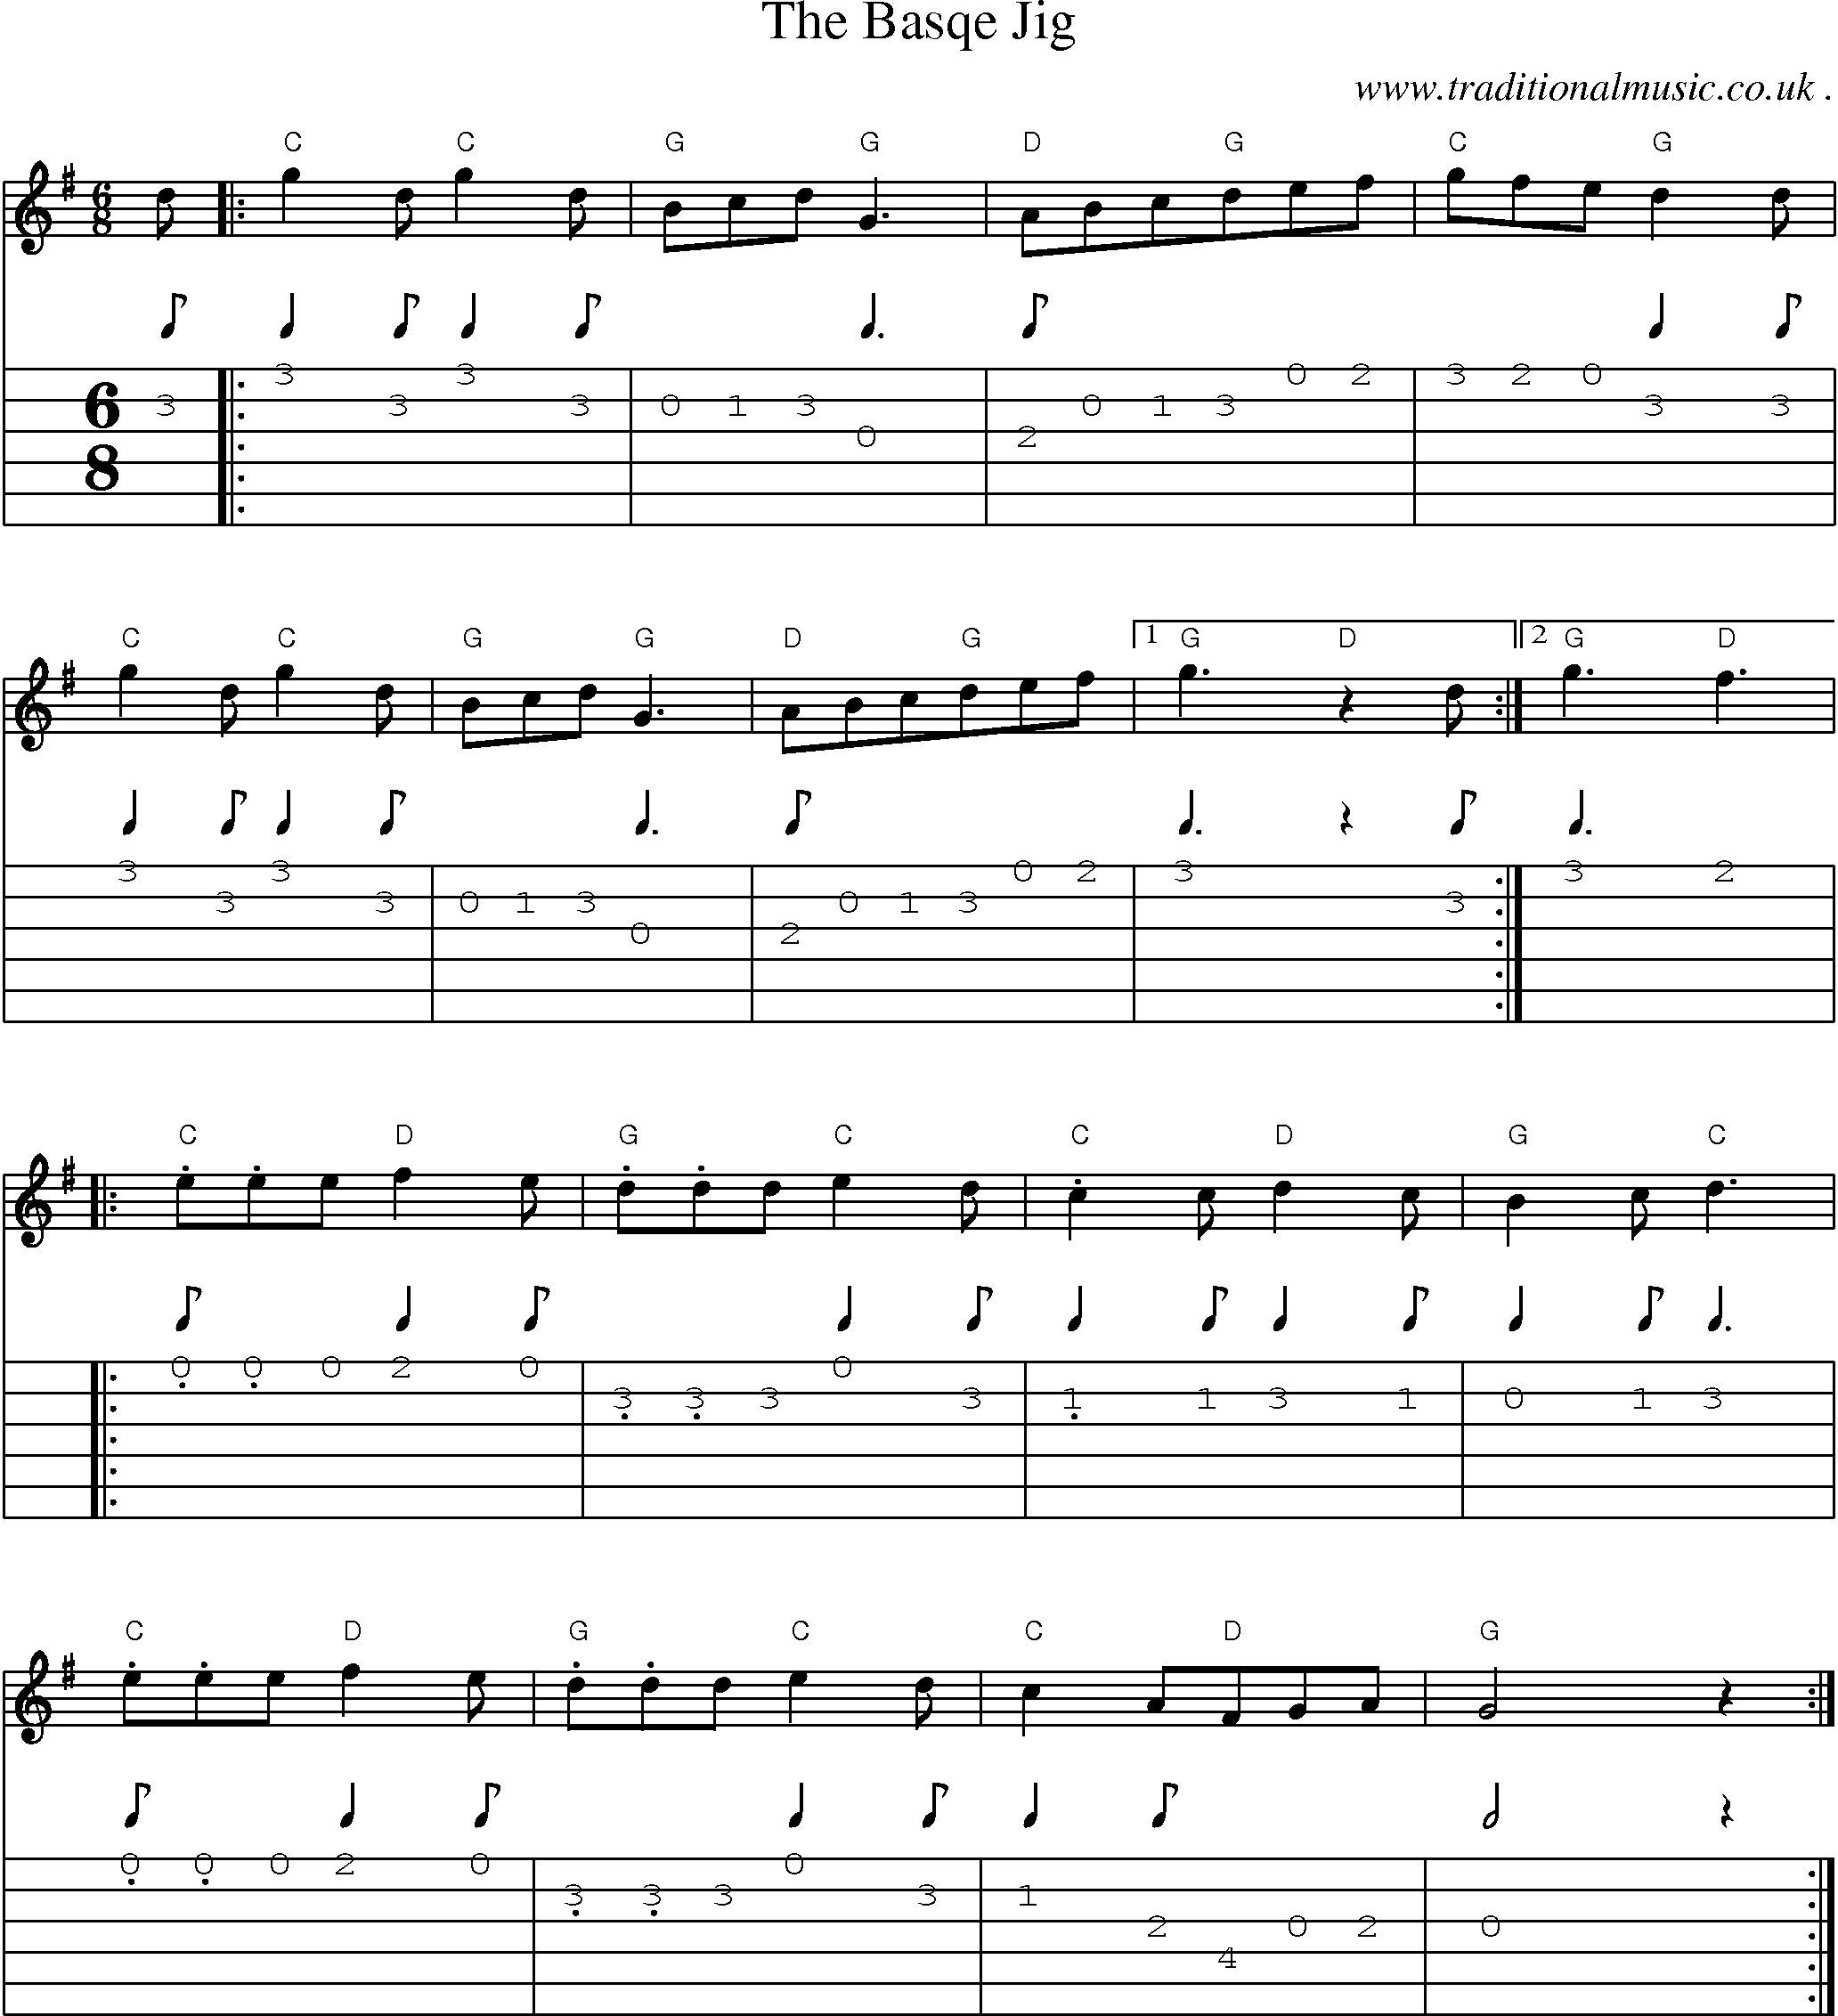 Sheet-Music and Guitar Tabs for The Basqe Jig